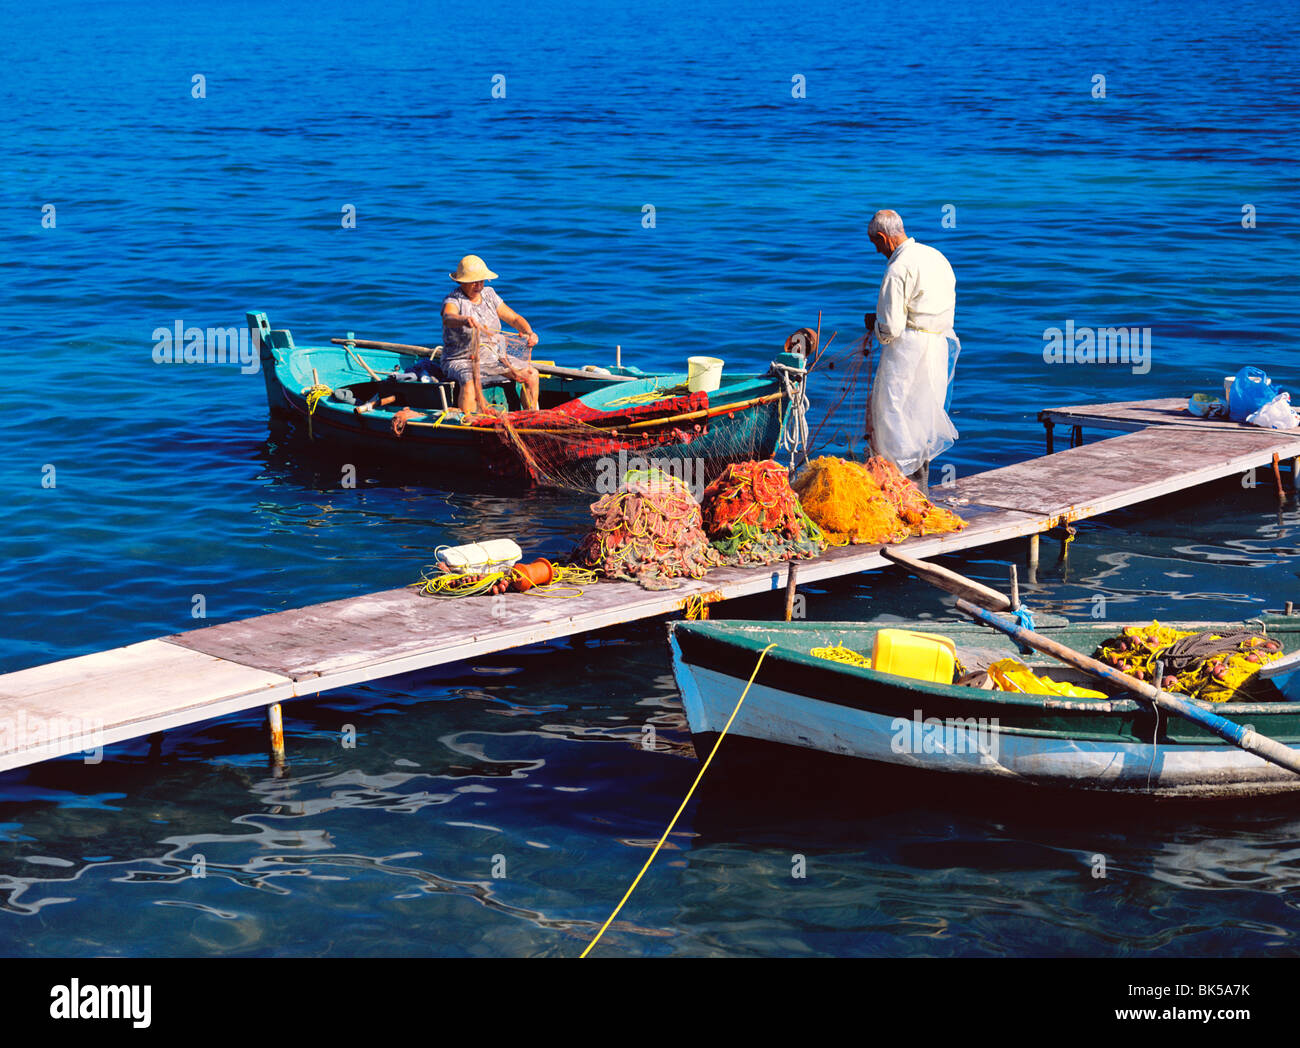 Fisherman and his wife cleaning the fishing nets in boat and jetty, Corfu, Greek Islands, Greece, Europe Stock Photo